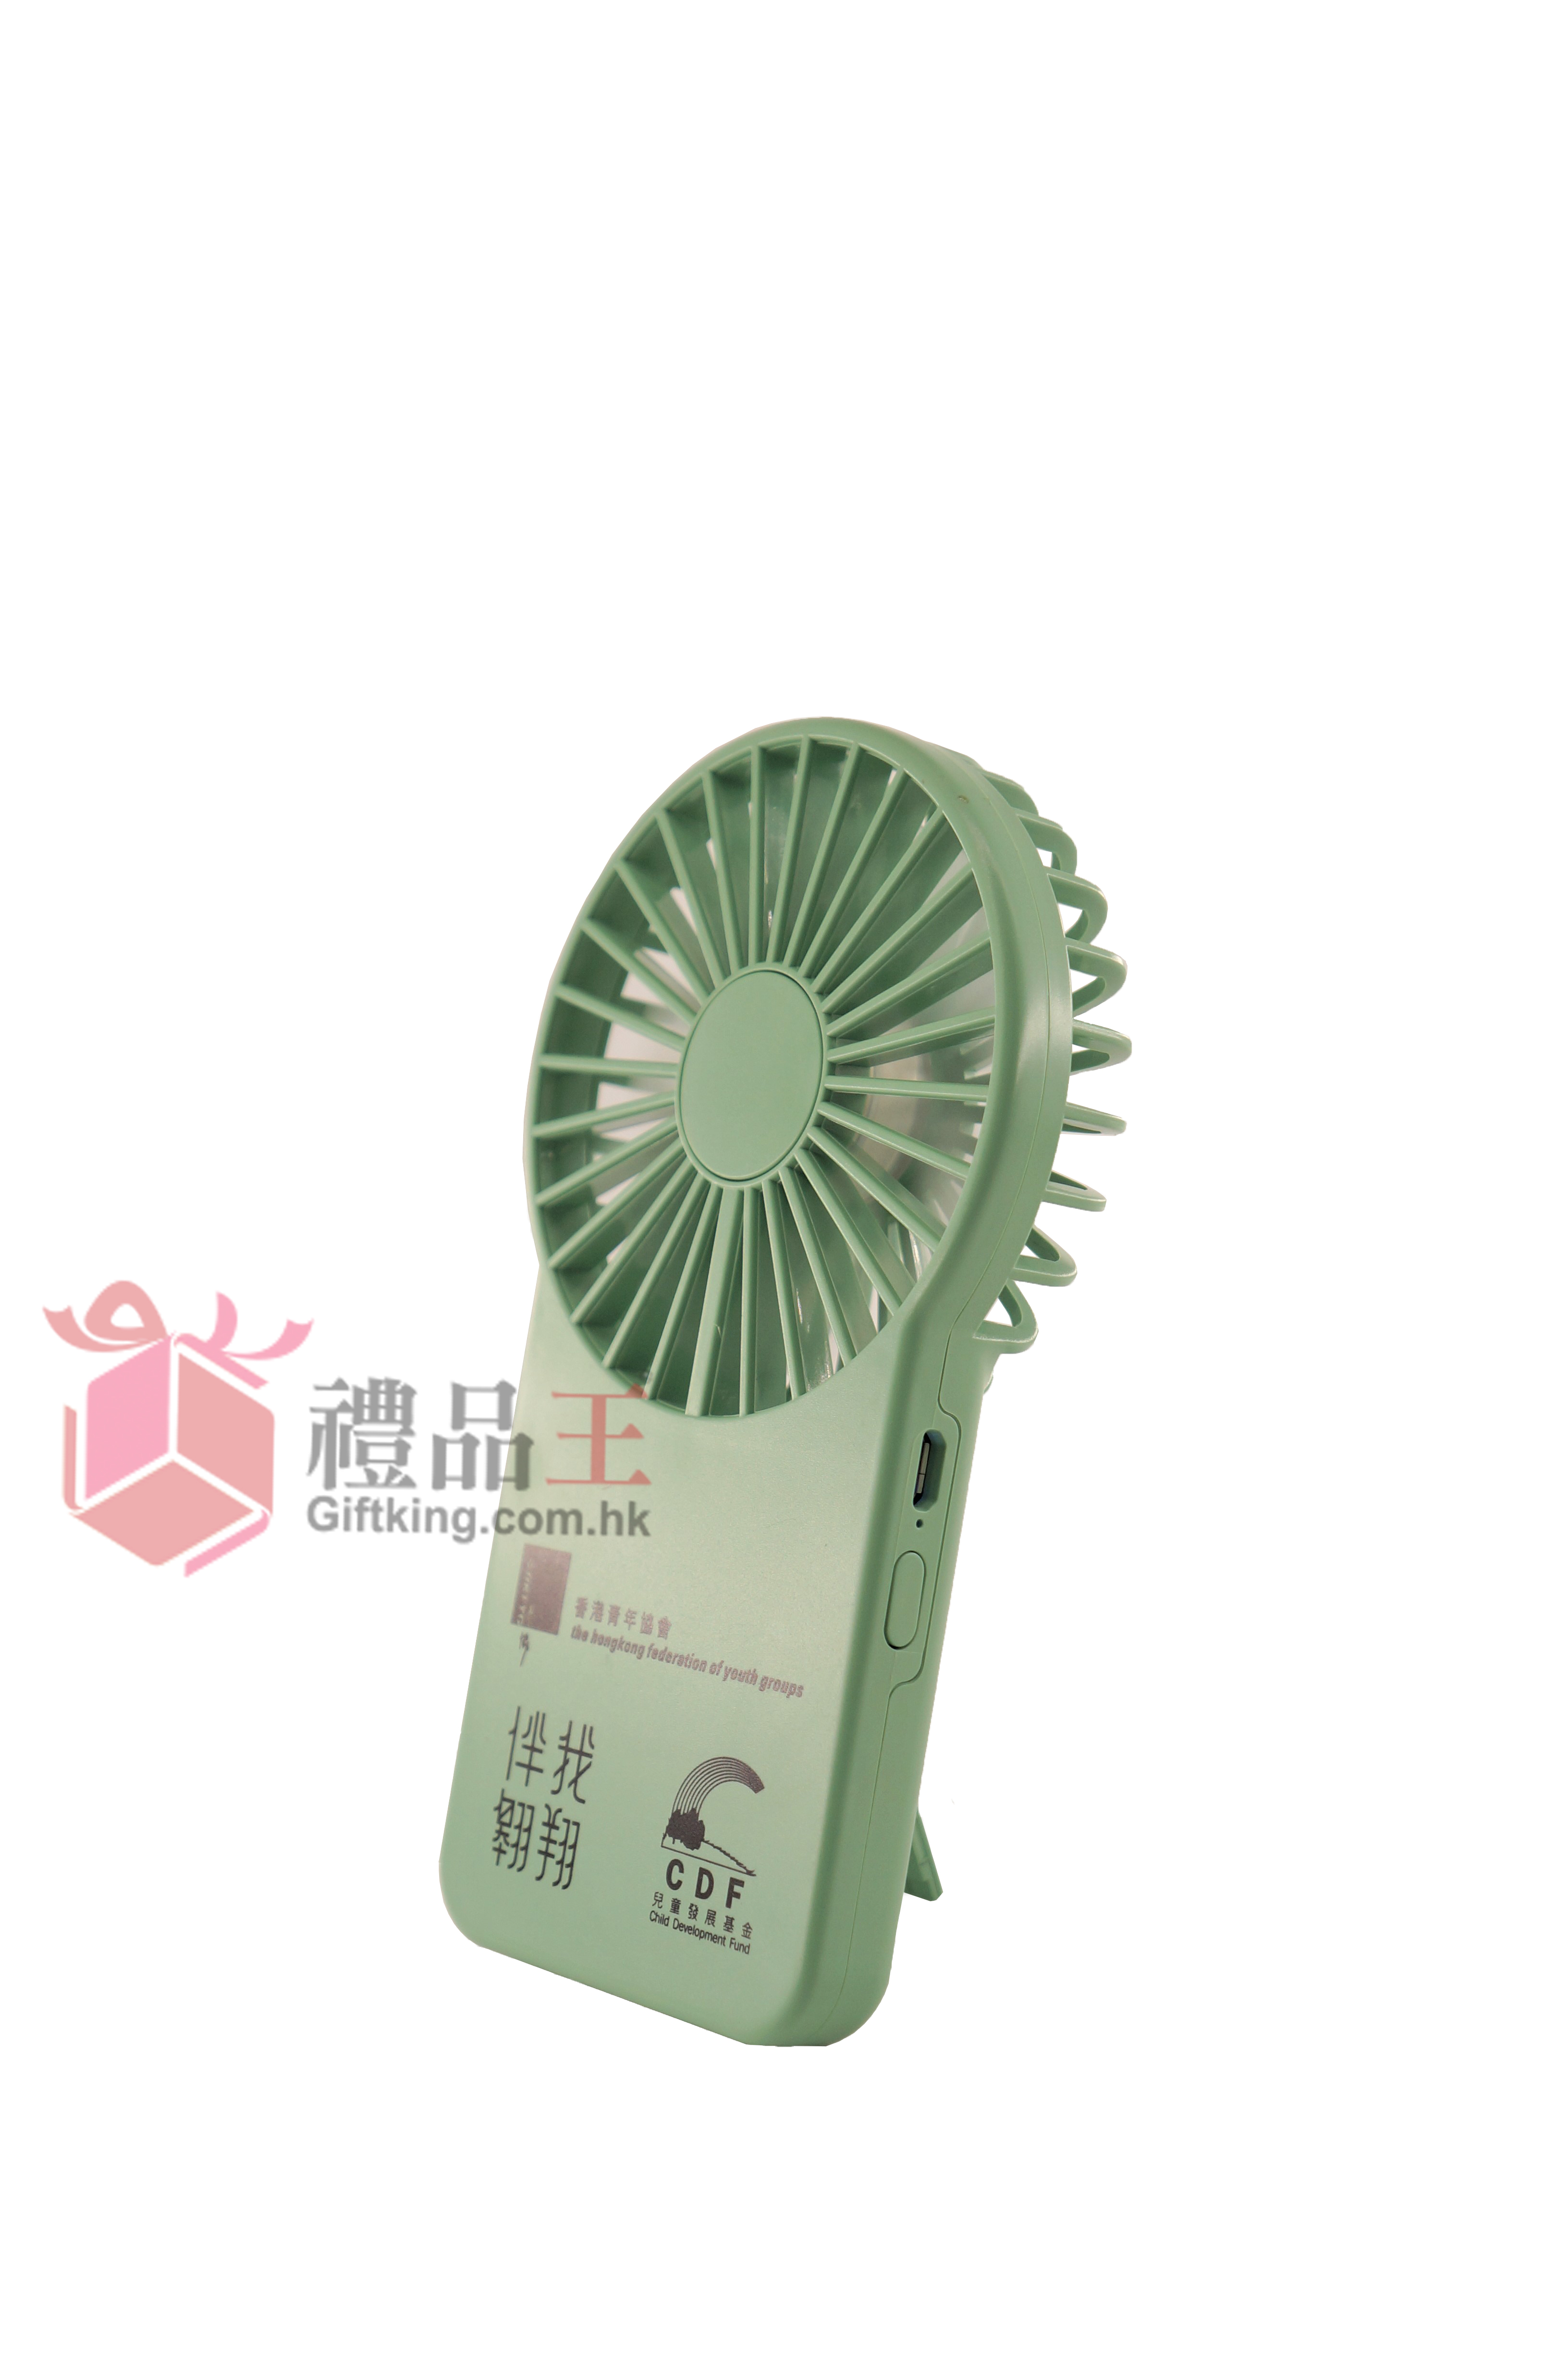 The Hongkong Federation Of Youth Groups Child Development Fund Mini  A10 Fan (Electronic Gift)